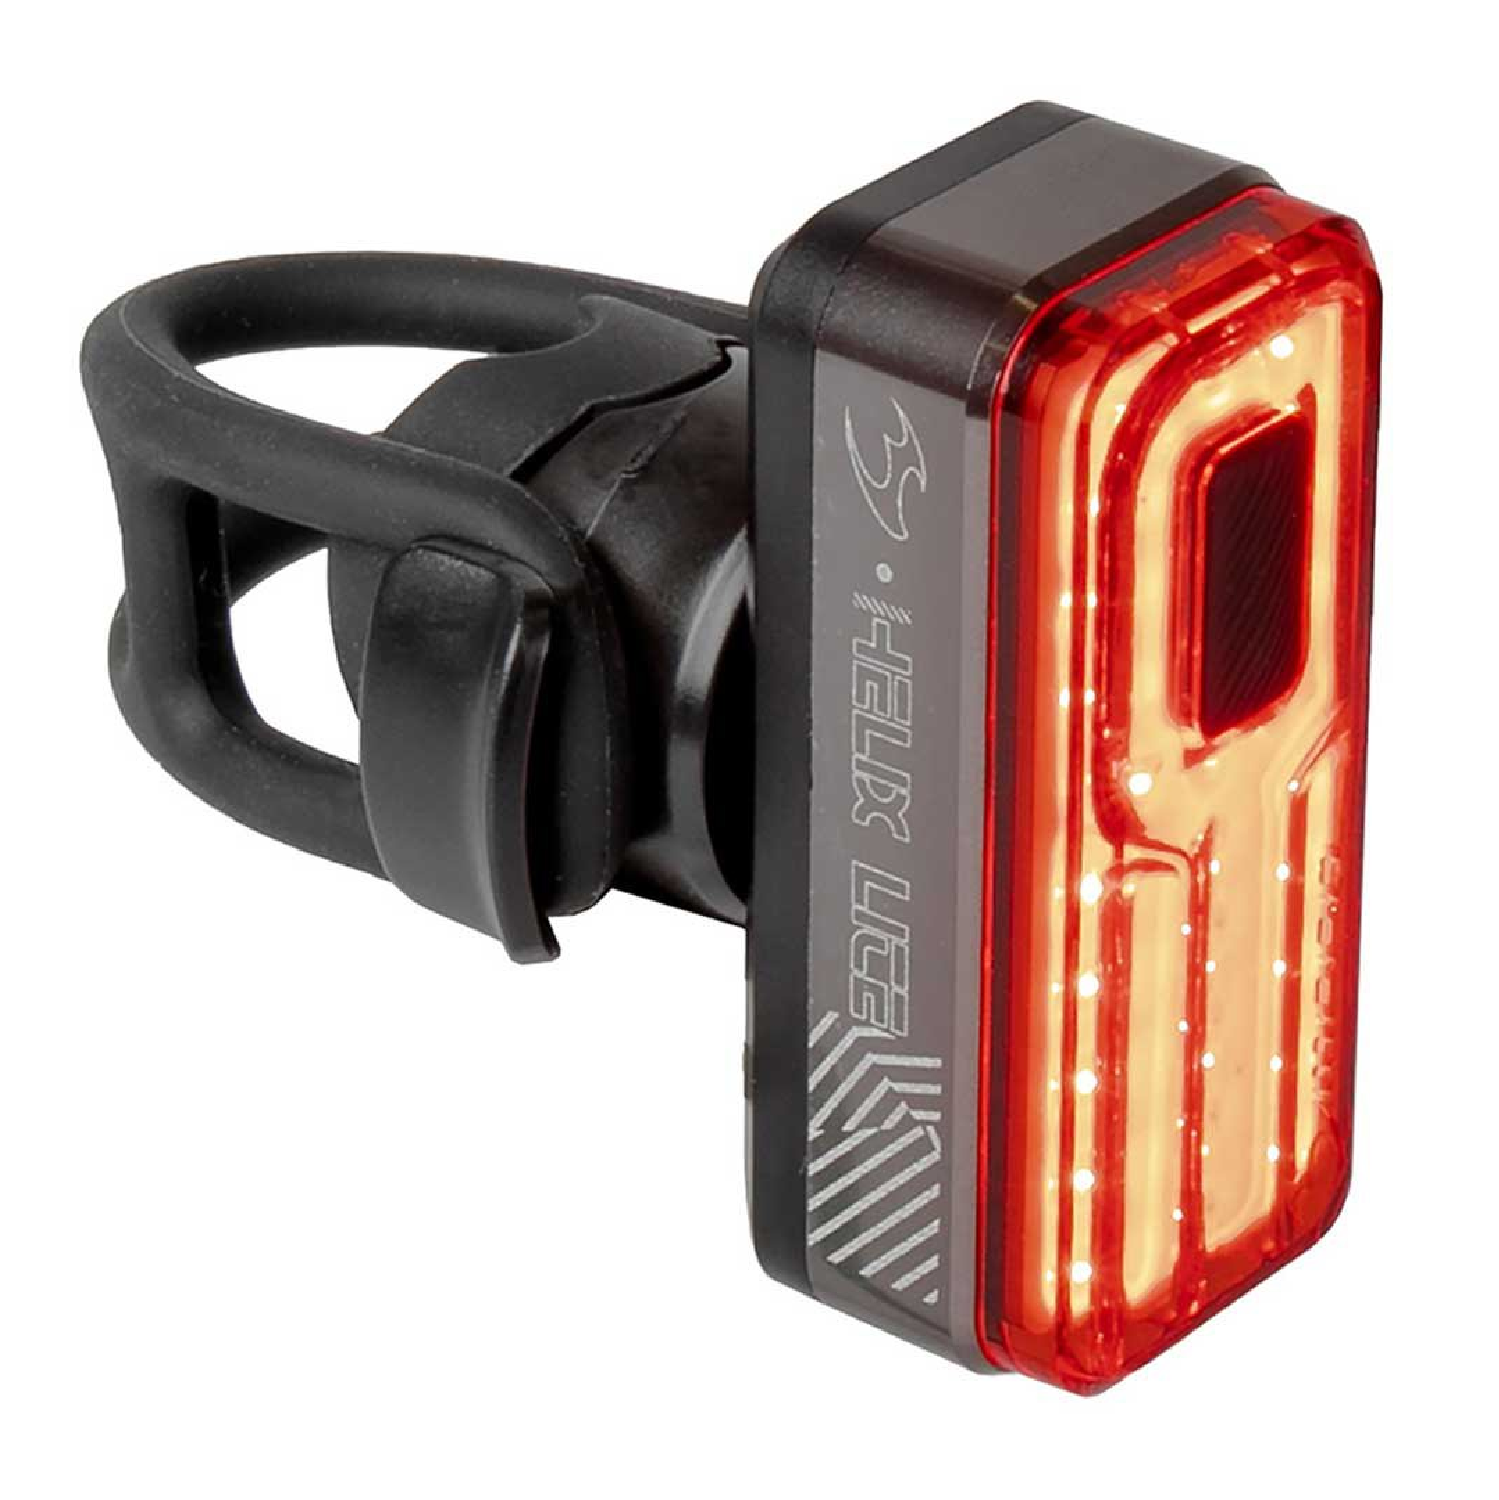 Moon HELIX LITE Tail Light COB USB Rechargeable Bicycle Bike Red Light